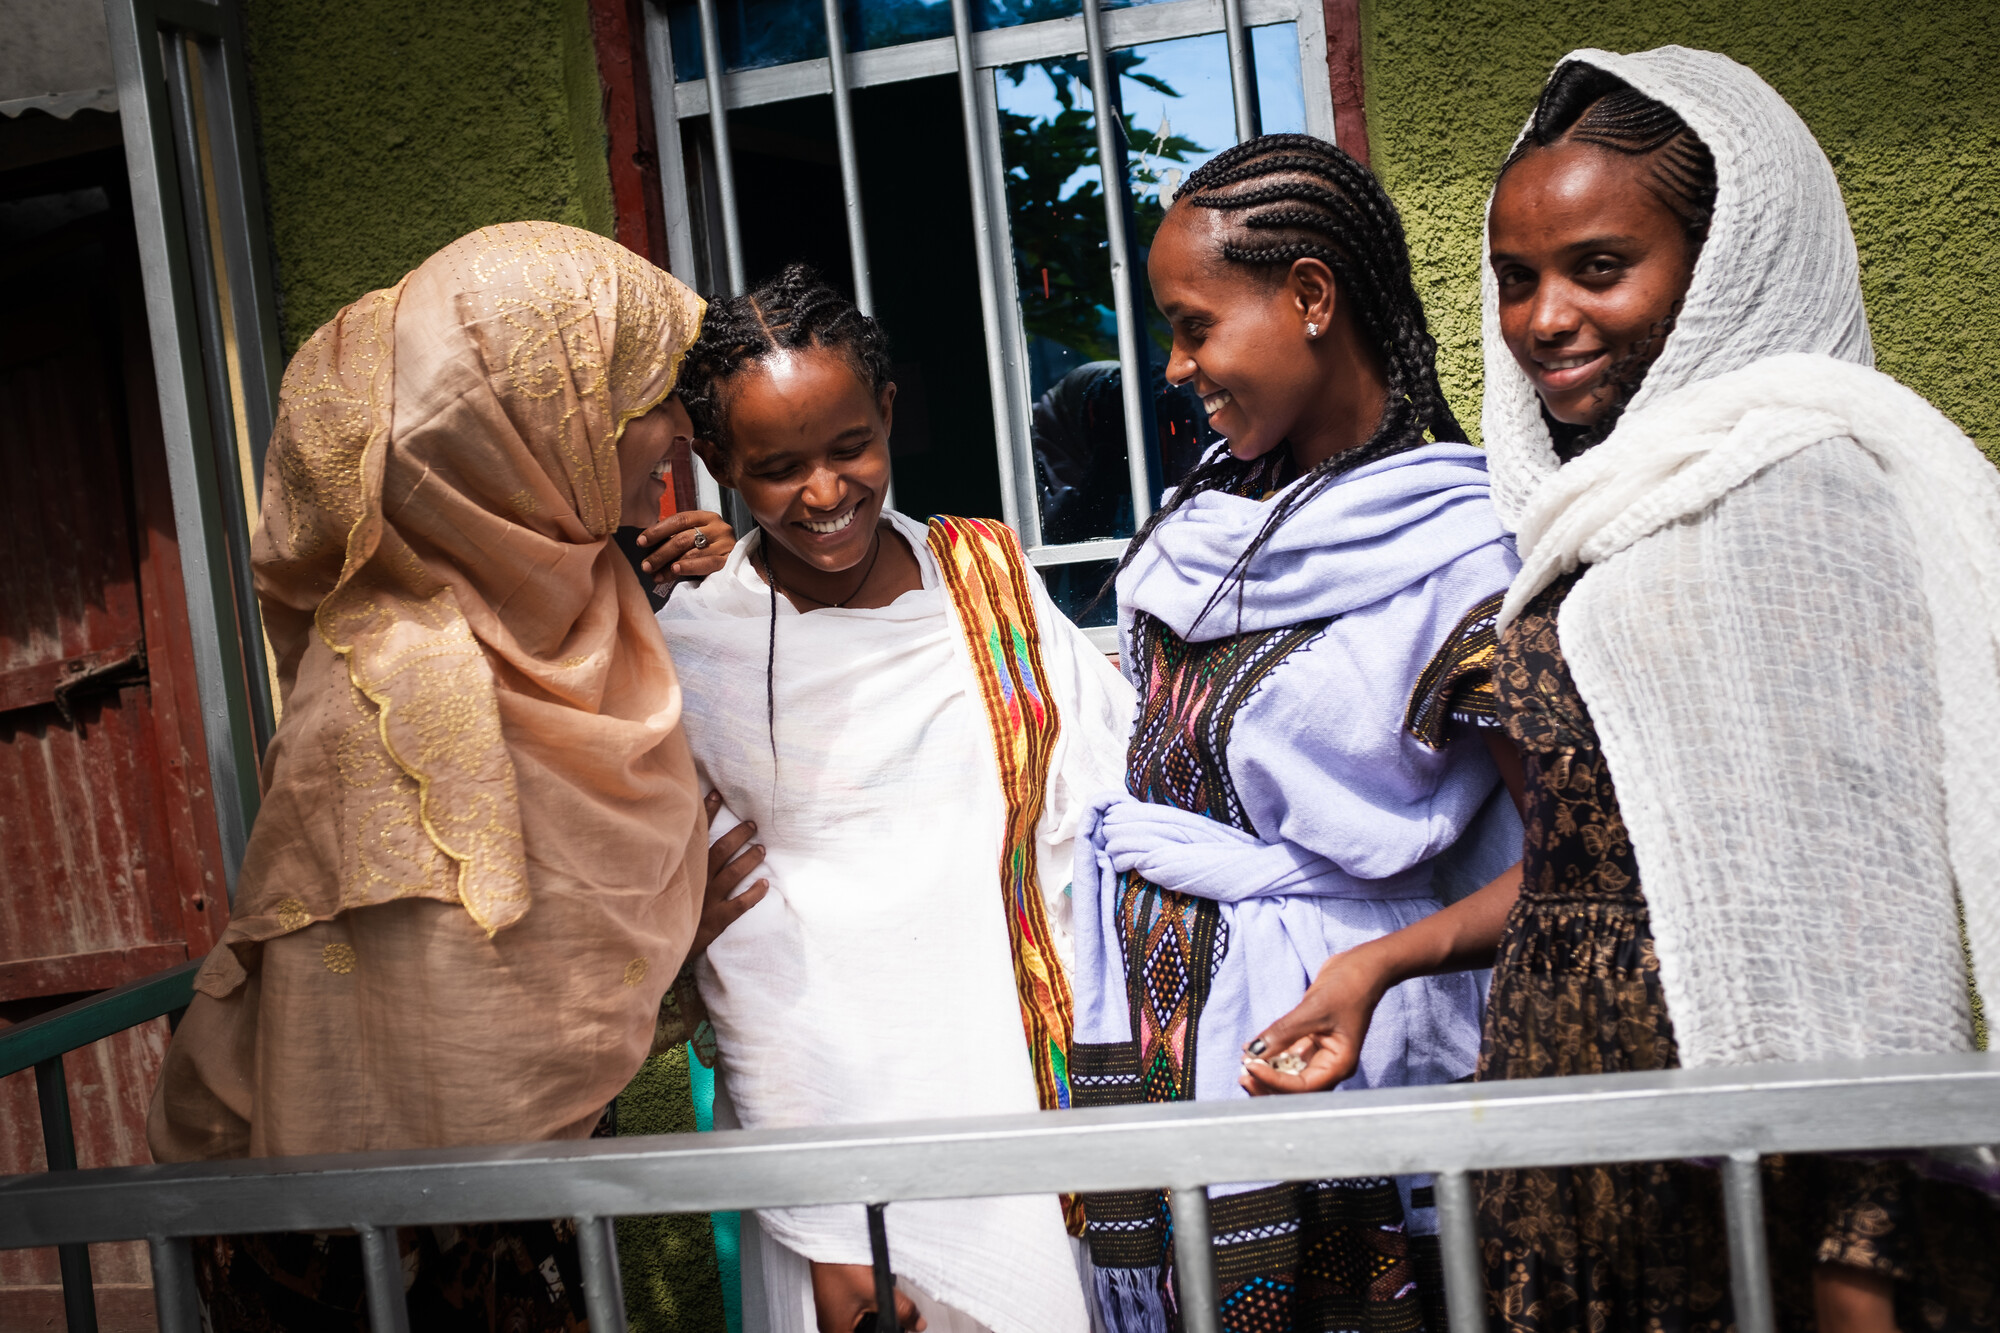 (L to R) Habiba, Meseret, Samrawit and Lemelem volunteer their time with WE-Action to lead weekly women’s discussion groups focusing on trauma caused by the recent conflict in the region. Photo: Caroline Leal/OXFAM